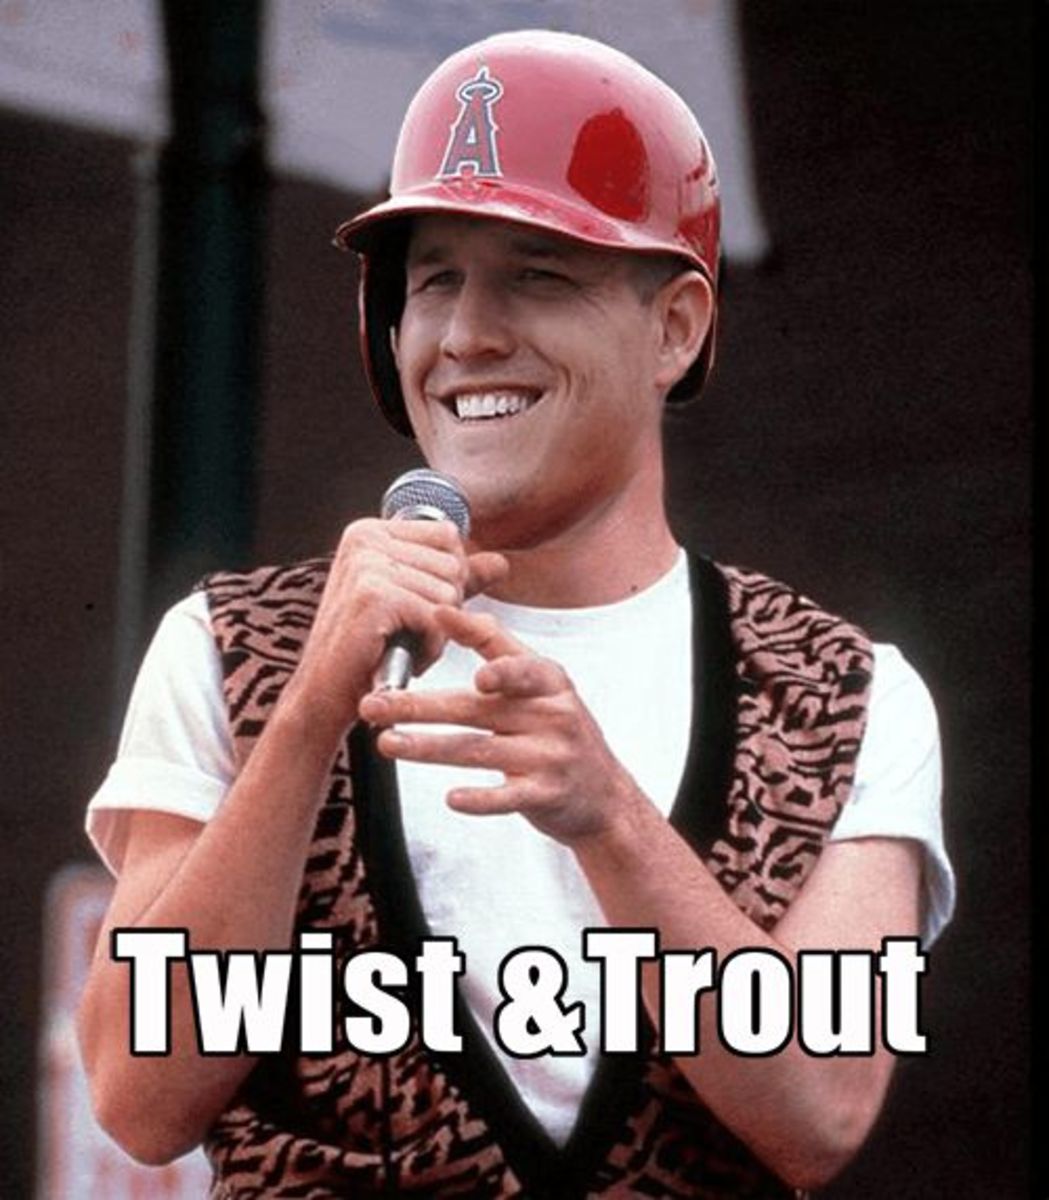 Fantasy Baseball Team Logos Images Funny Mike Trout